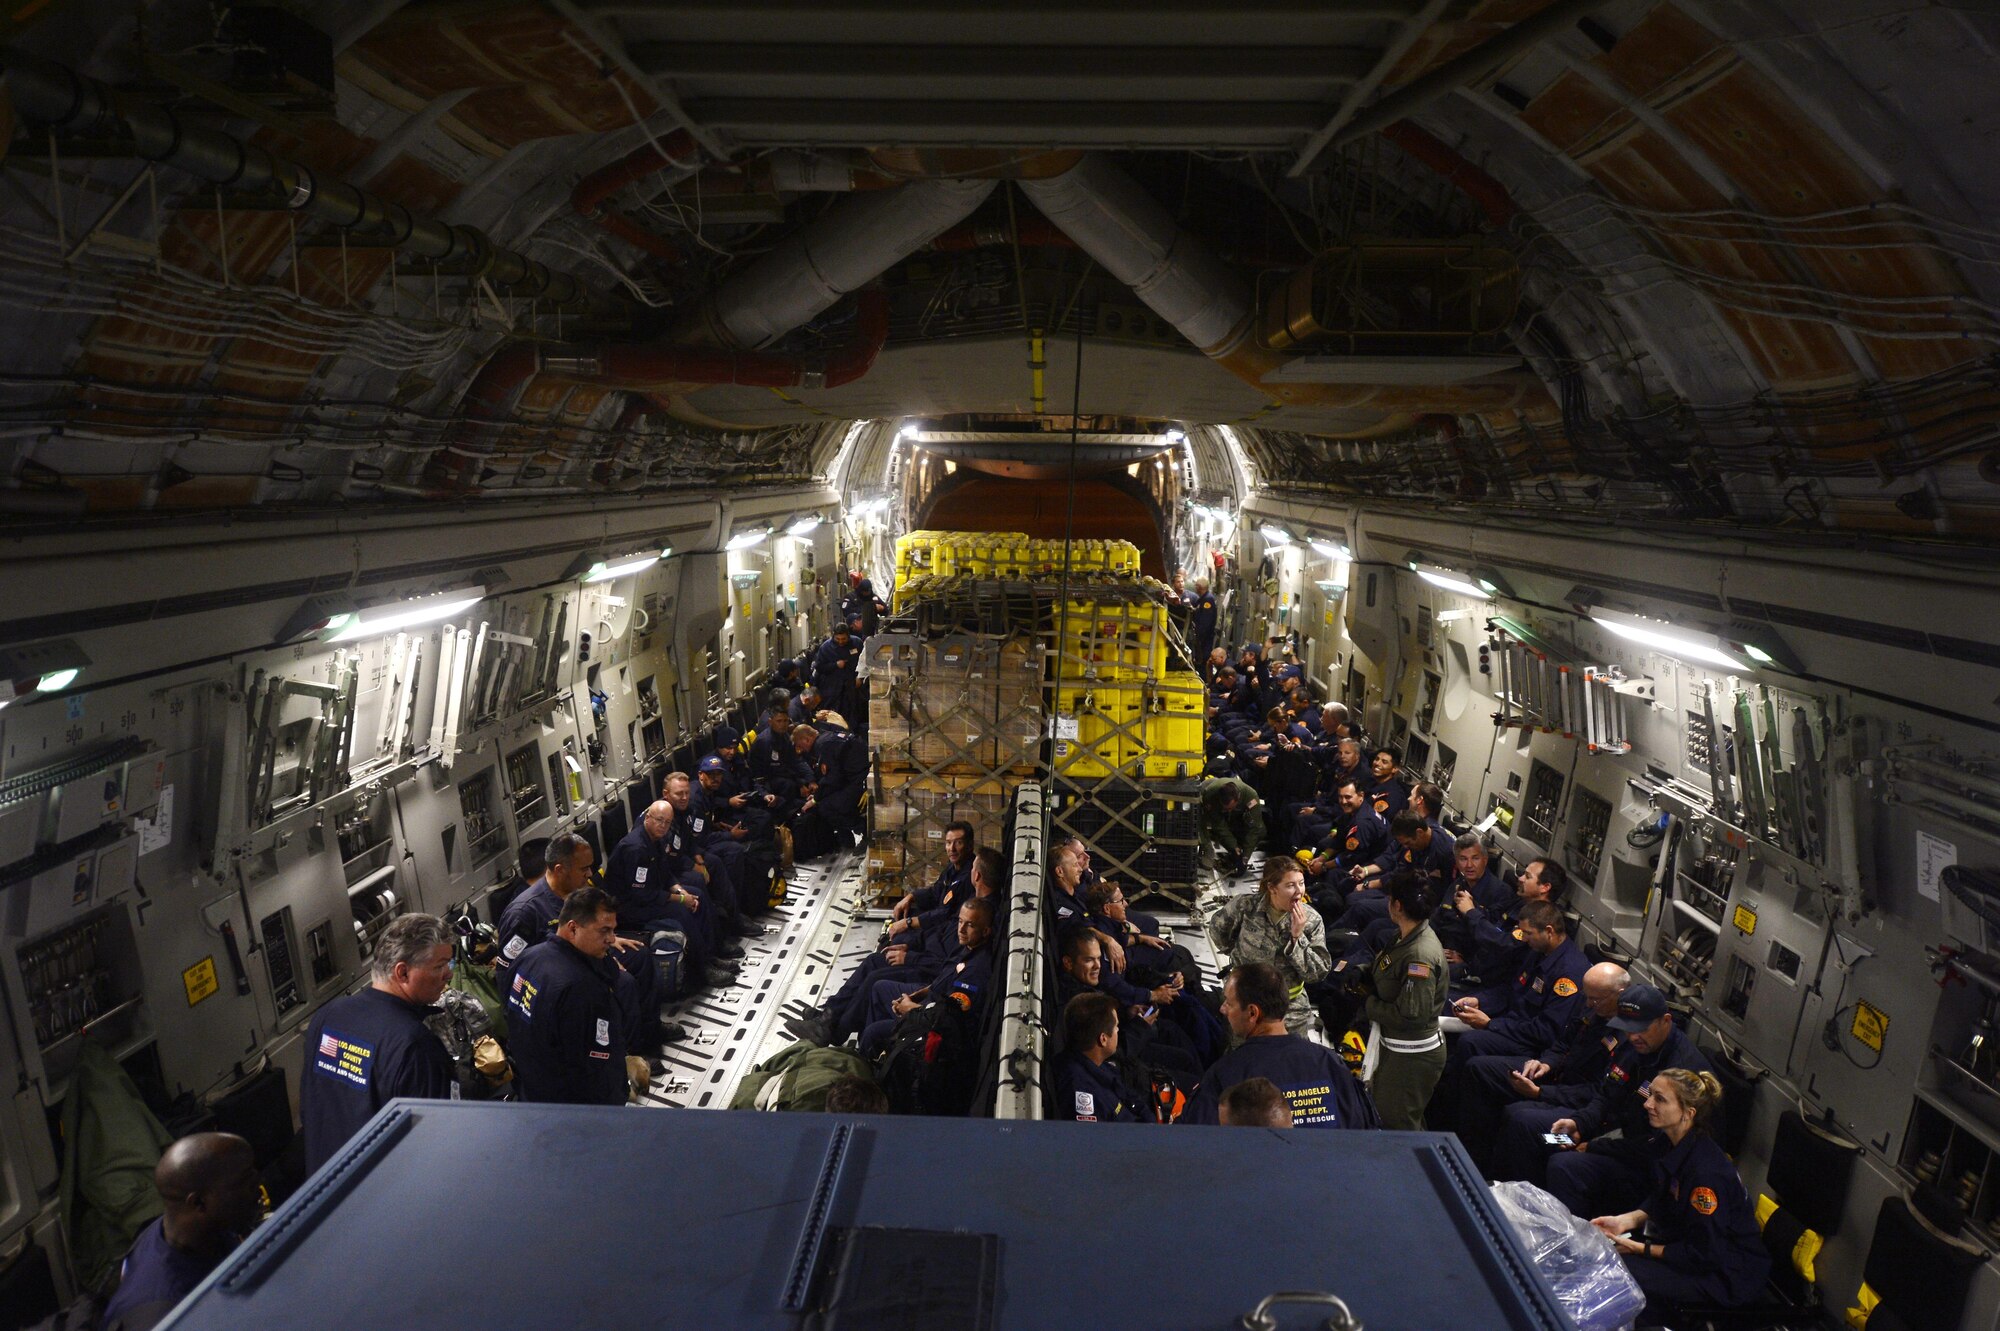 U.S. Air Force personnel load relief supplies for victims of the Nepal earthquake into a USAF C-17 Globemaster III from Joint Base Charleston, S.C., at March Air Force Base, Calif., April 26, 2015. The U.S. Agency of International Development relief cargo included eight pallets, 59 Los Angeles County Fire Department personnel and five search and rescue dogs. (U.S. Air Force photo by Airman 1st Class Taylor Queen/Released)